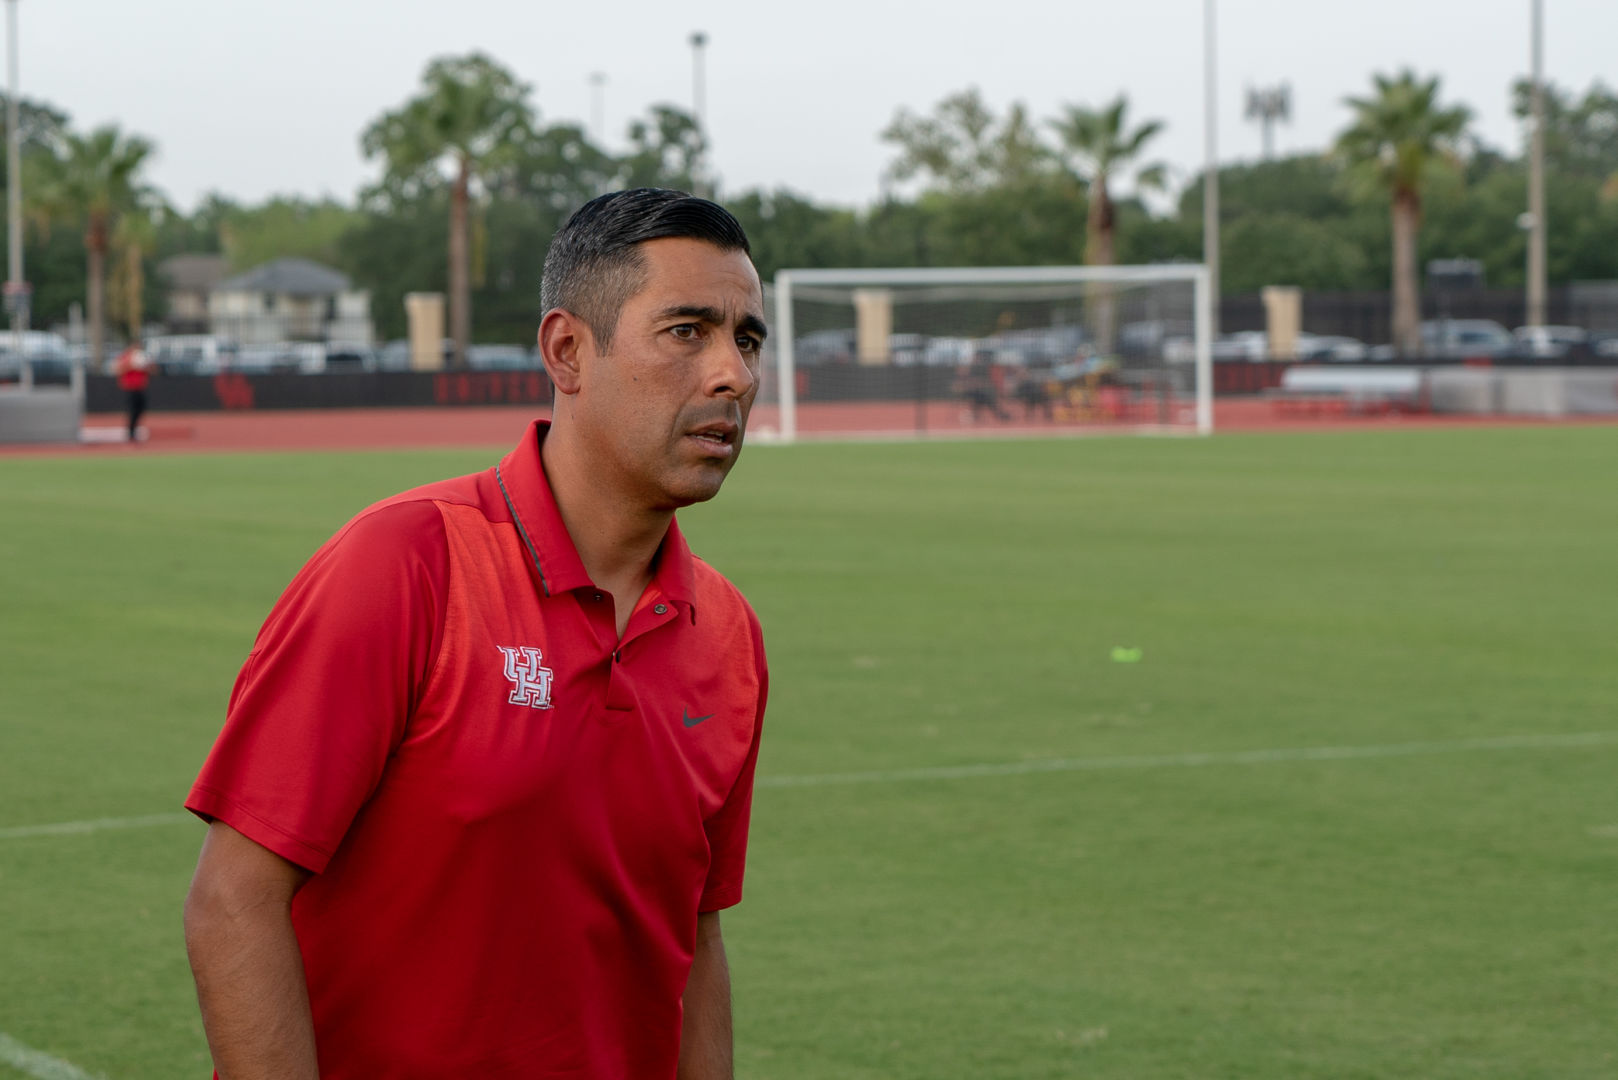 Head coach Diego Bocanegra was at the "punishment workout," as an anonymous player described it to KPRC in June, where, according to the rhabdo investigation, the team did 200-300 "up-downs." | File photo